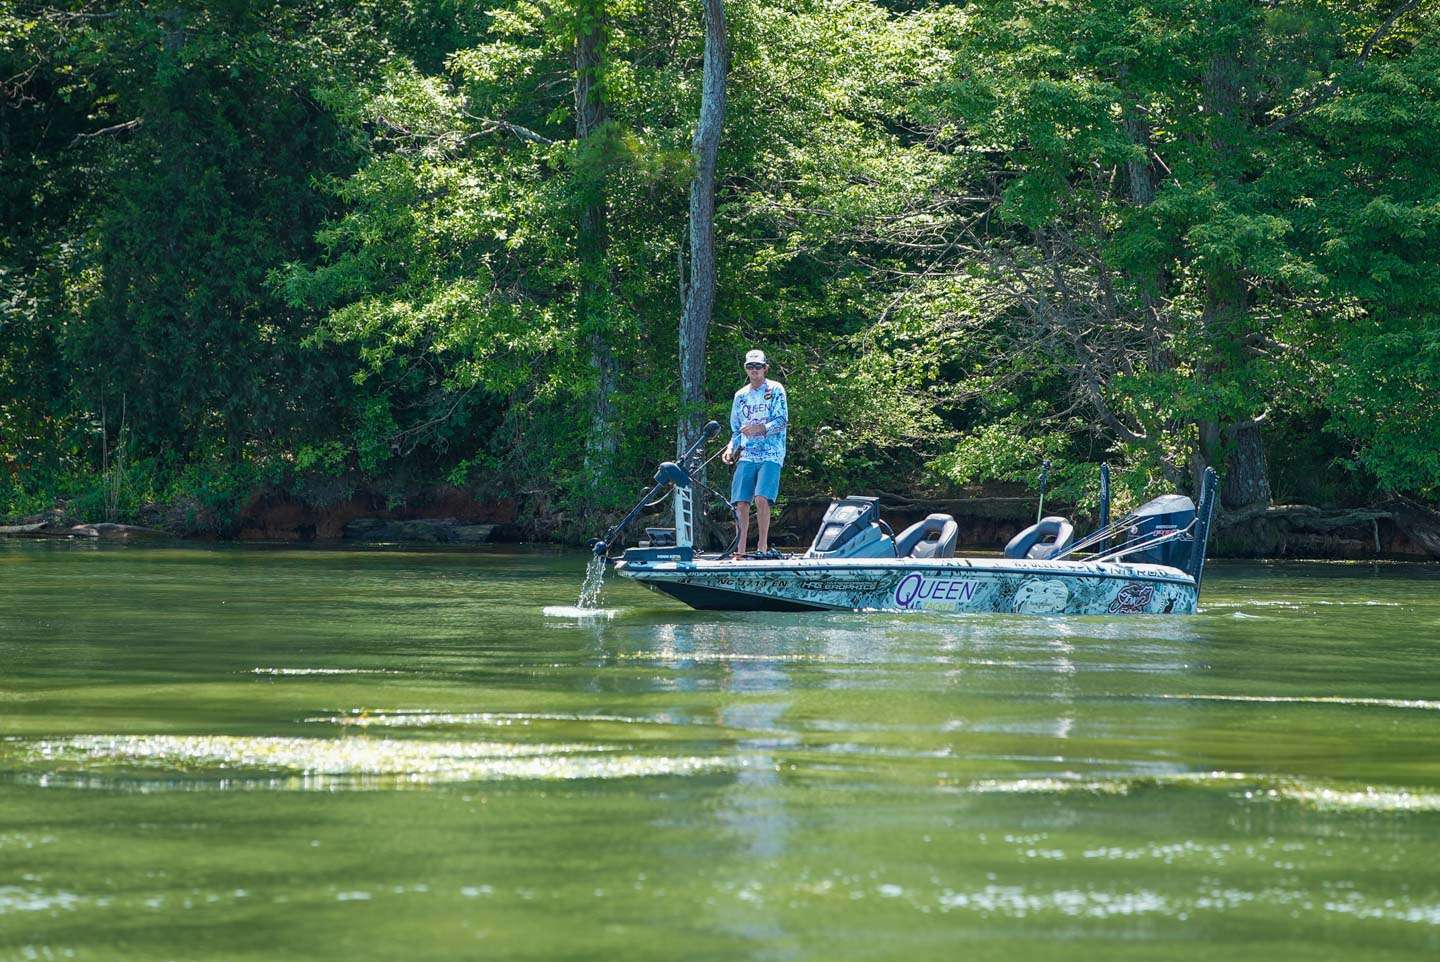 Check in with KJ Queen as he takes on Day 2 of the 2021 Berkley Bassmaster Elite at Lake Guntersville!